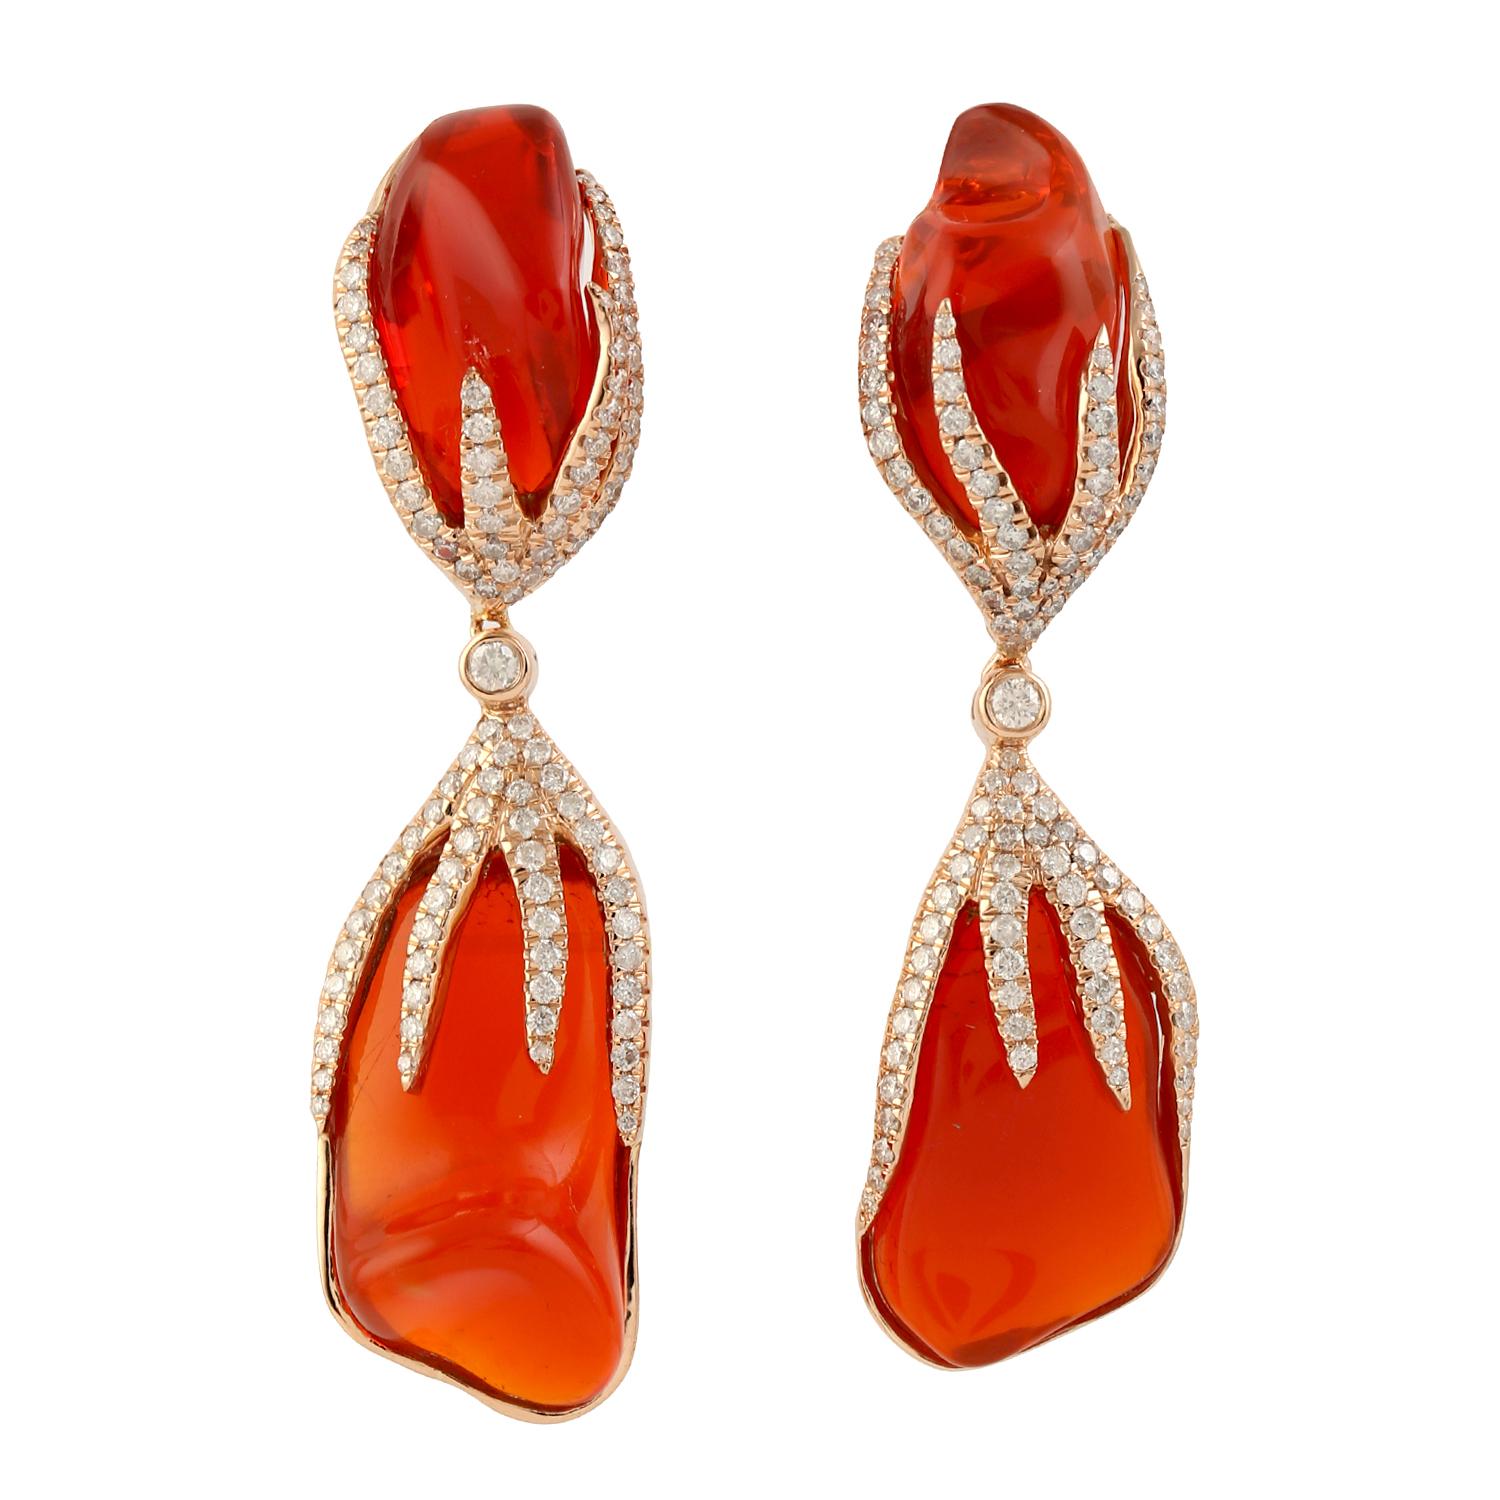 Cast in 18 karat gold. These earrings are hand set in 25.75 carats fire opal and 1.36 carats of sparkling diamonds.

FOLLOW  MEGHNA JEWELS storefront to view the latest collection & exclusive pieces.  Meghna Jewels is proudly rated as a Top Seller